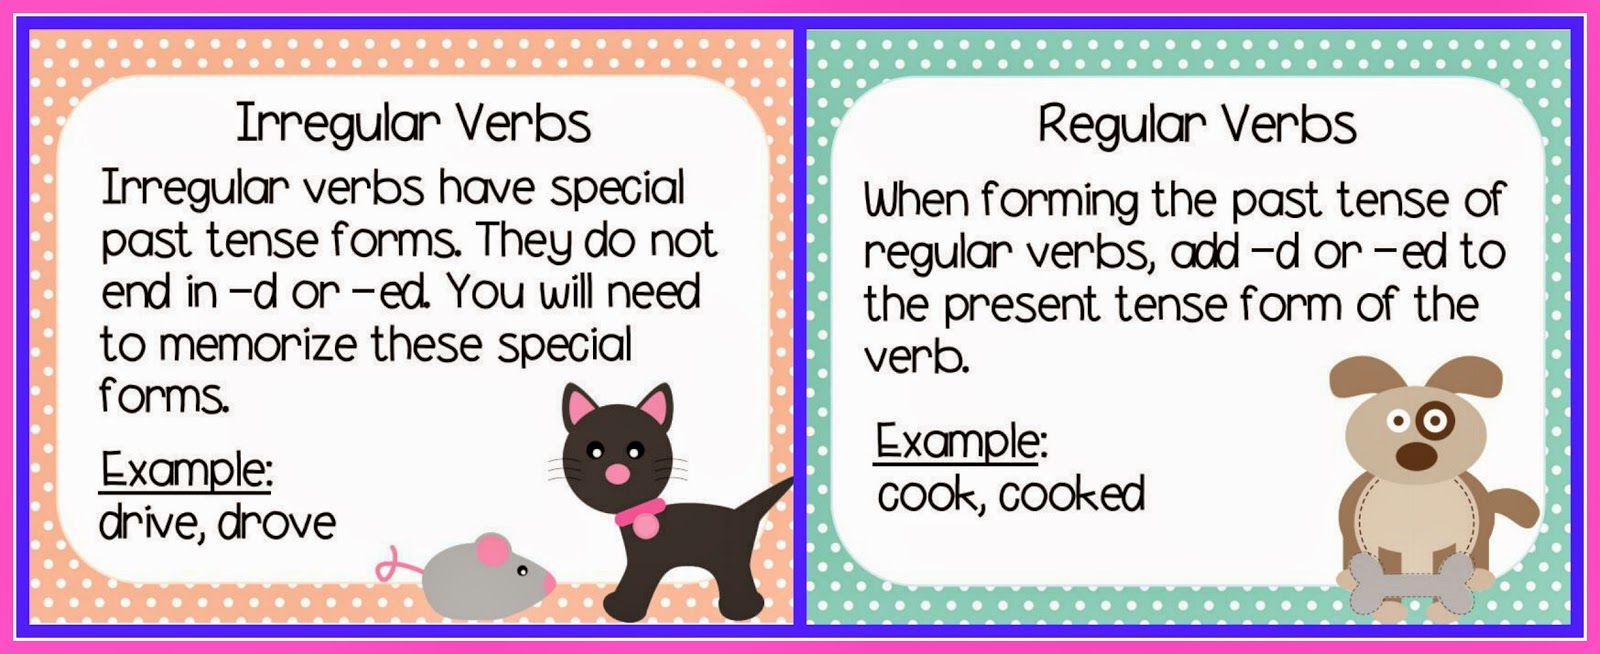 irregular-verbs-online-and-pdf-exercise-by-mashilo27-verb-worksheets-reading-comprehension